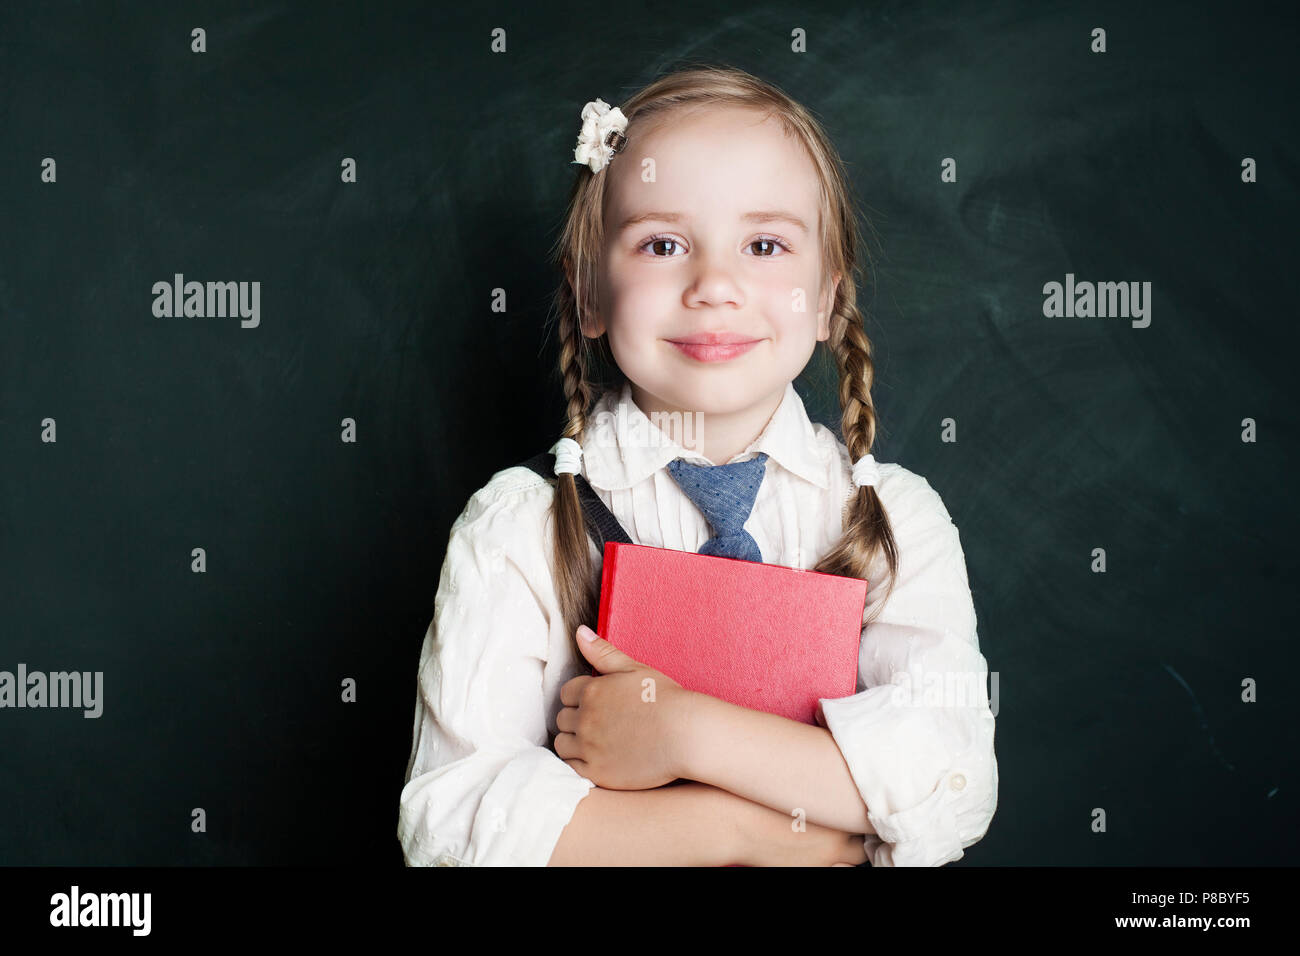 Cute little schoolgirl child with school book on green chalkboard background. Smiling pupil in classroom (child 5-6 years old) Stock Photo